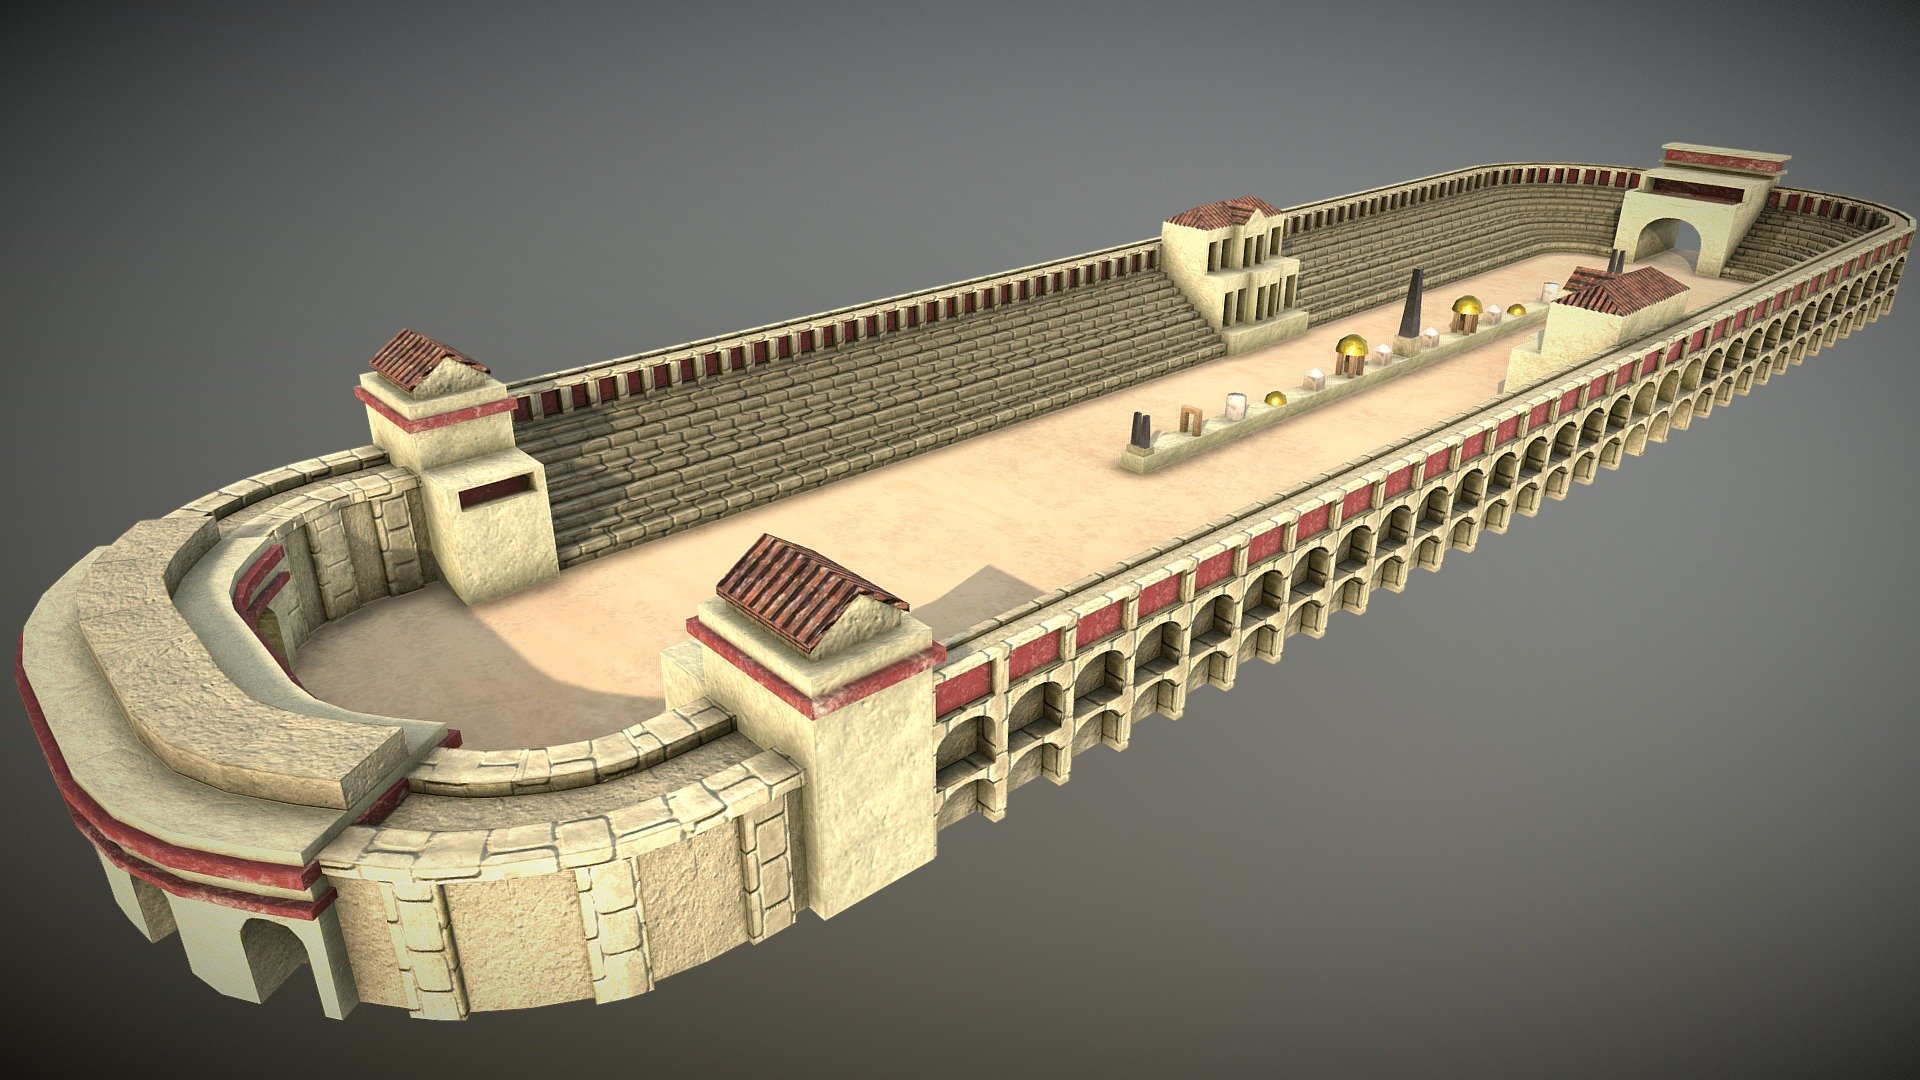 Texturized by me @xeep

Modeling by @jacobomuino

Made for BOC Project - Roman Circus - 3D model by Xeep 3d model